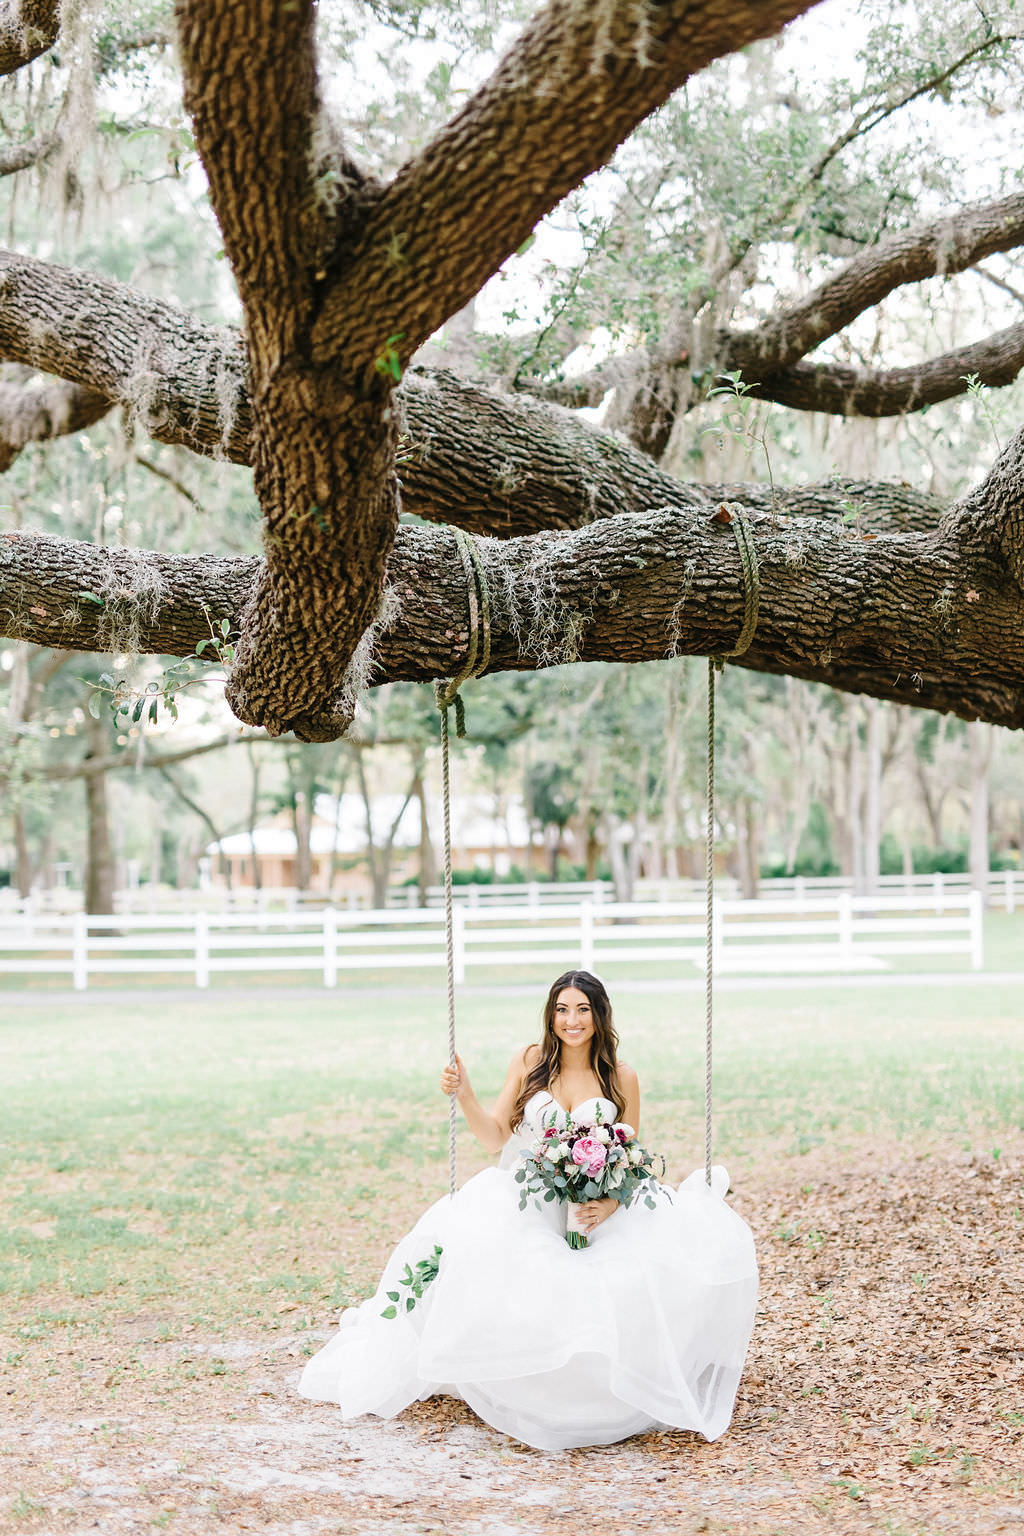 Outdoor Bride Wedding Portrait on Swing from Tree | Tampa Bay Wedding Planner Burlap to Lace | Venue The Lange Farm